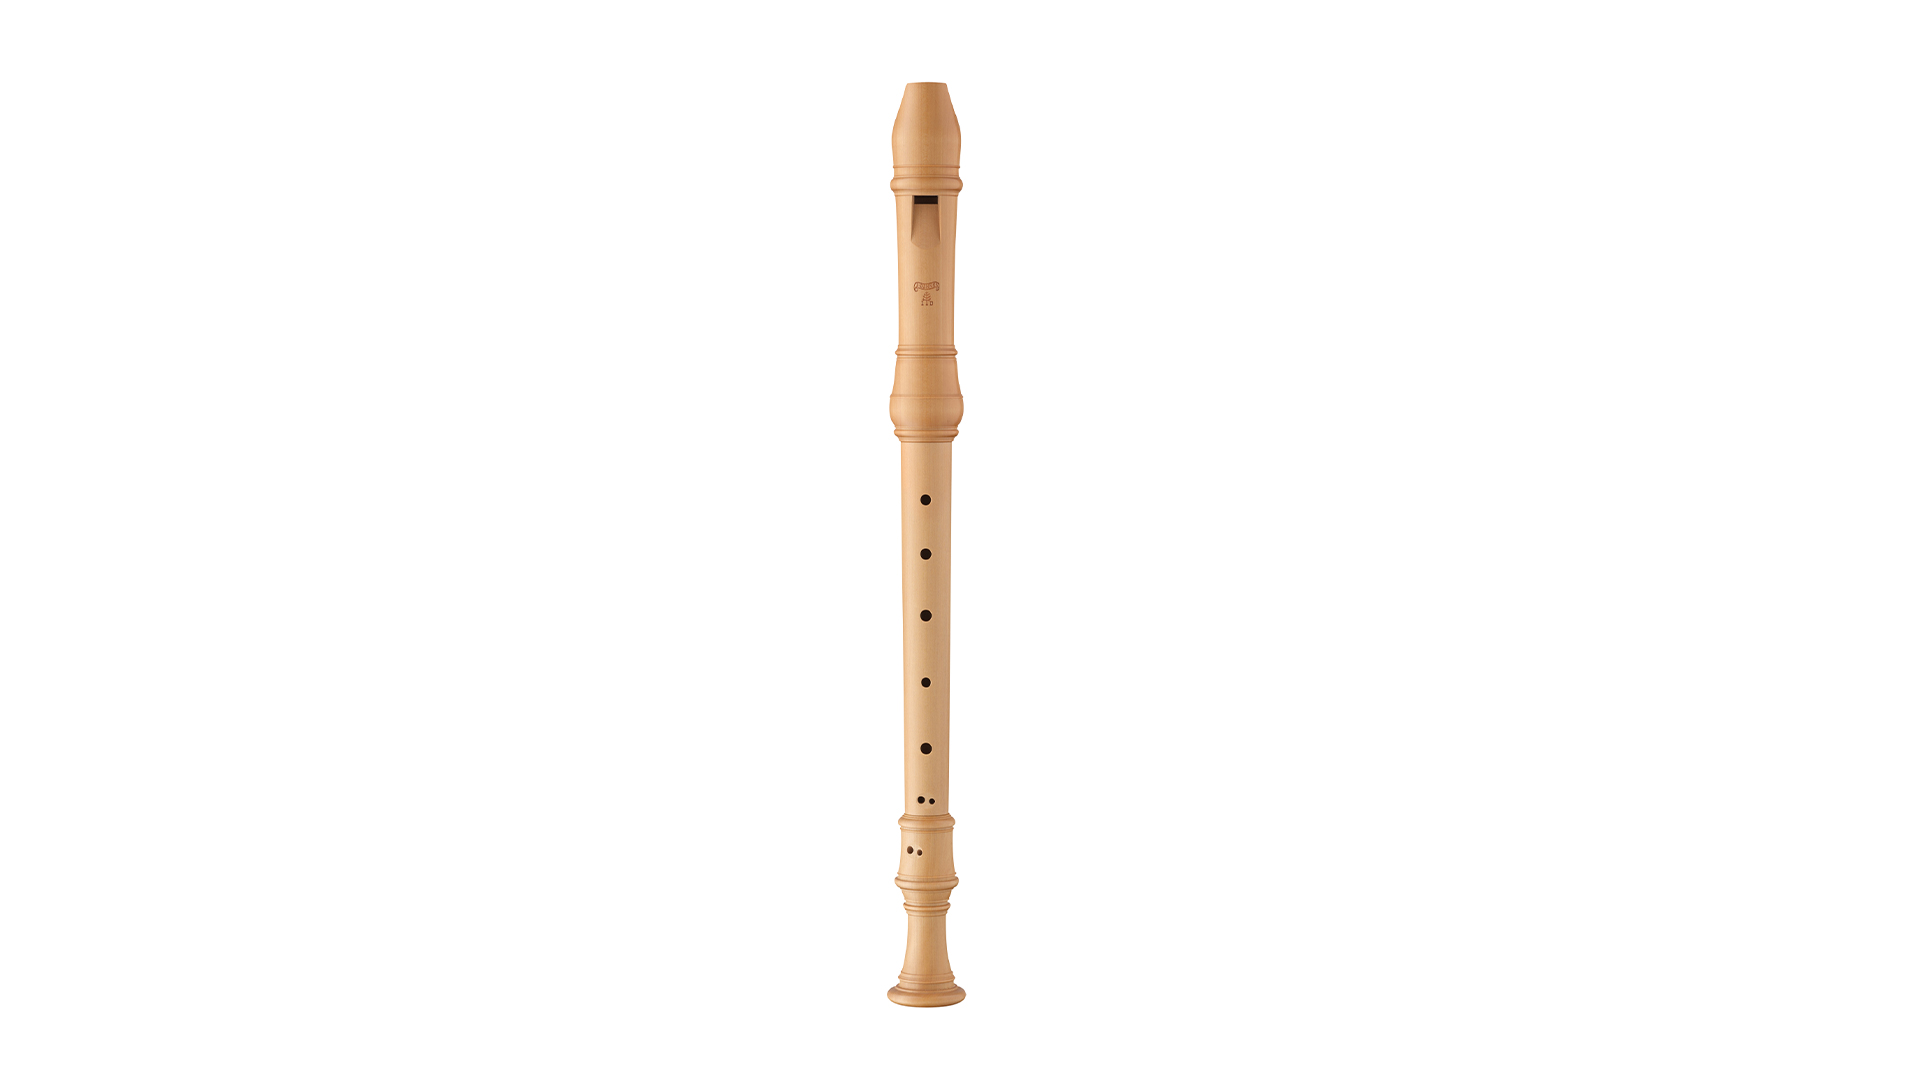 Moeck, "Denner", alto in f', baroque double hole, 442 Hz, boxwood